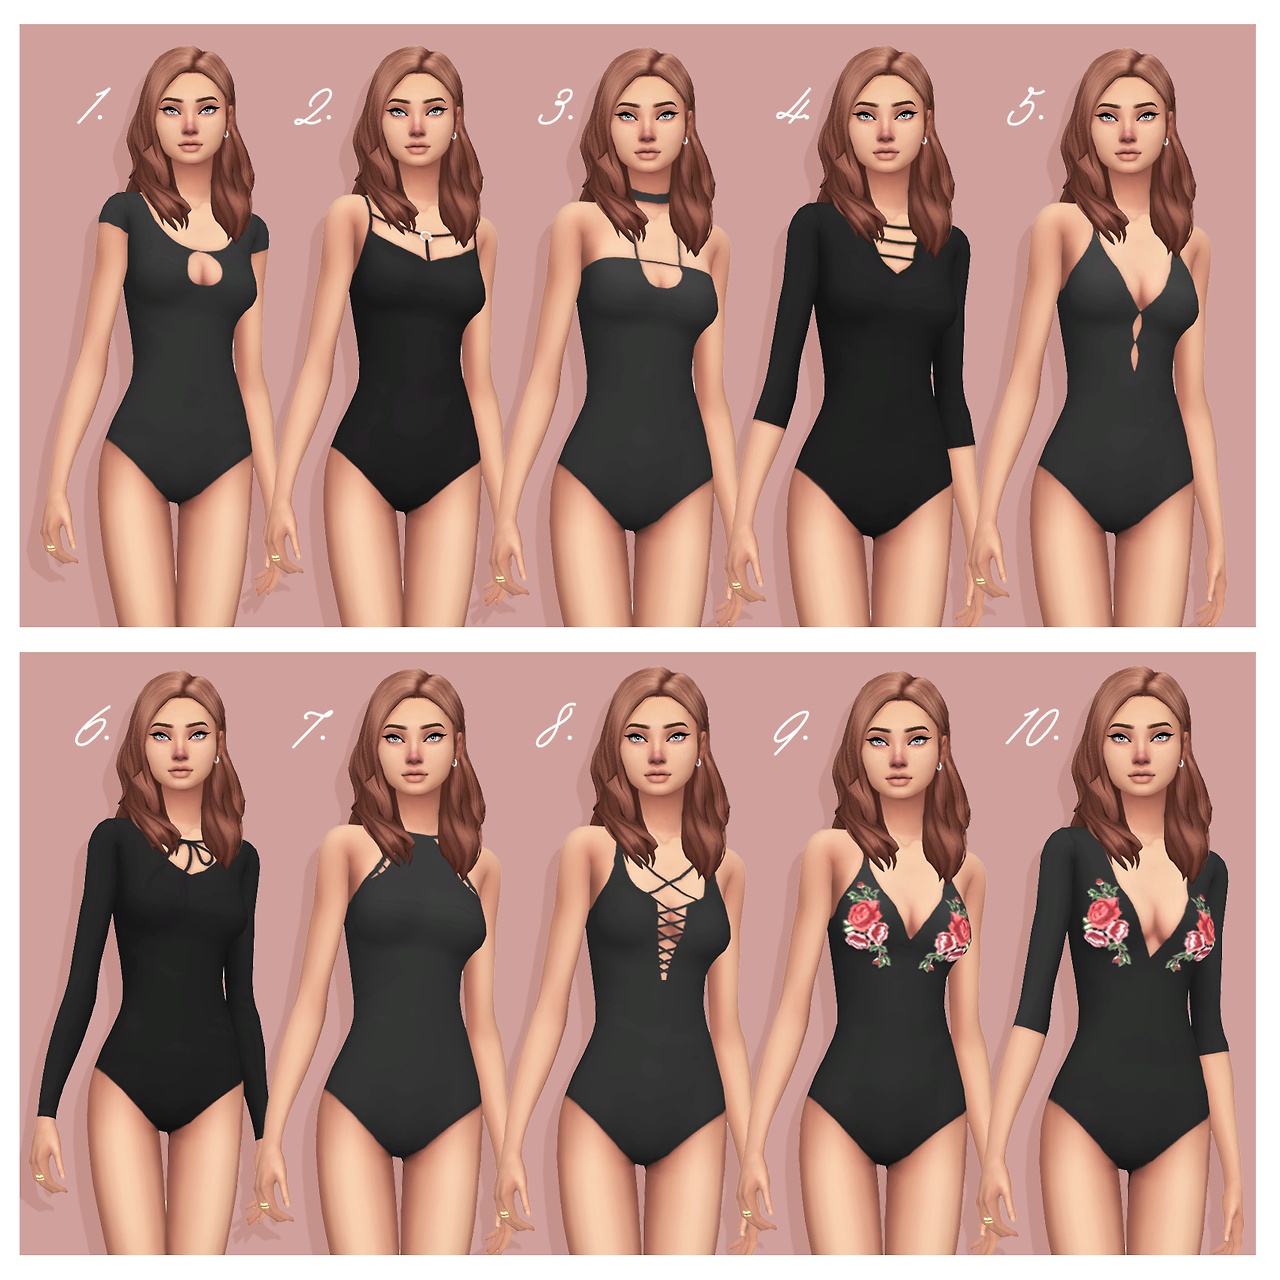 naked body mod for sims 4 free download